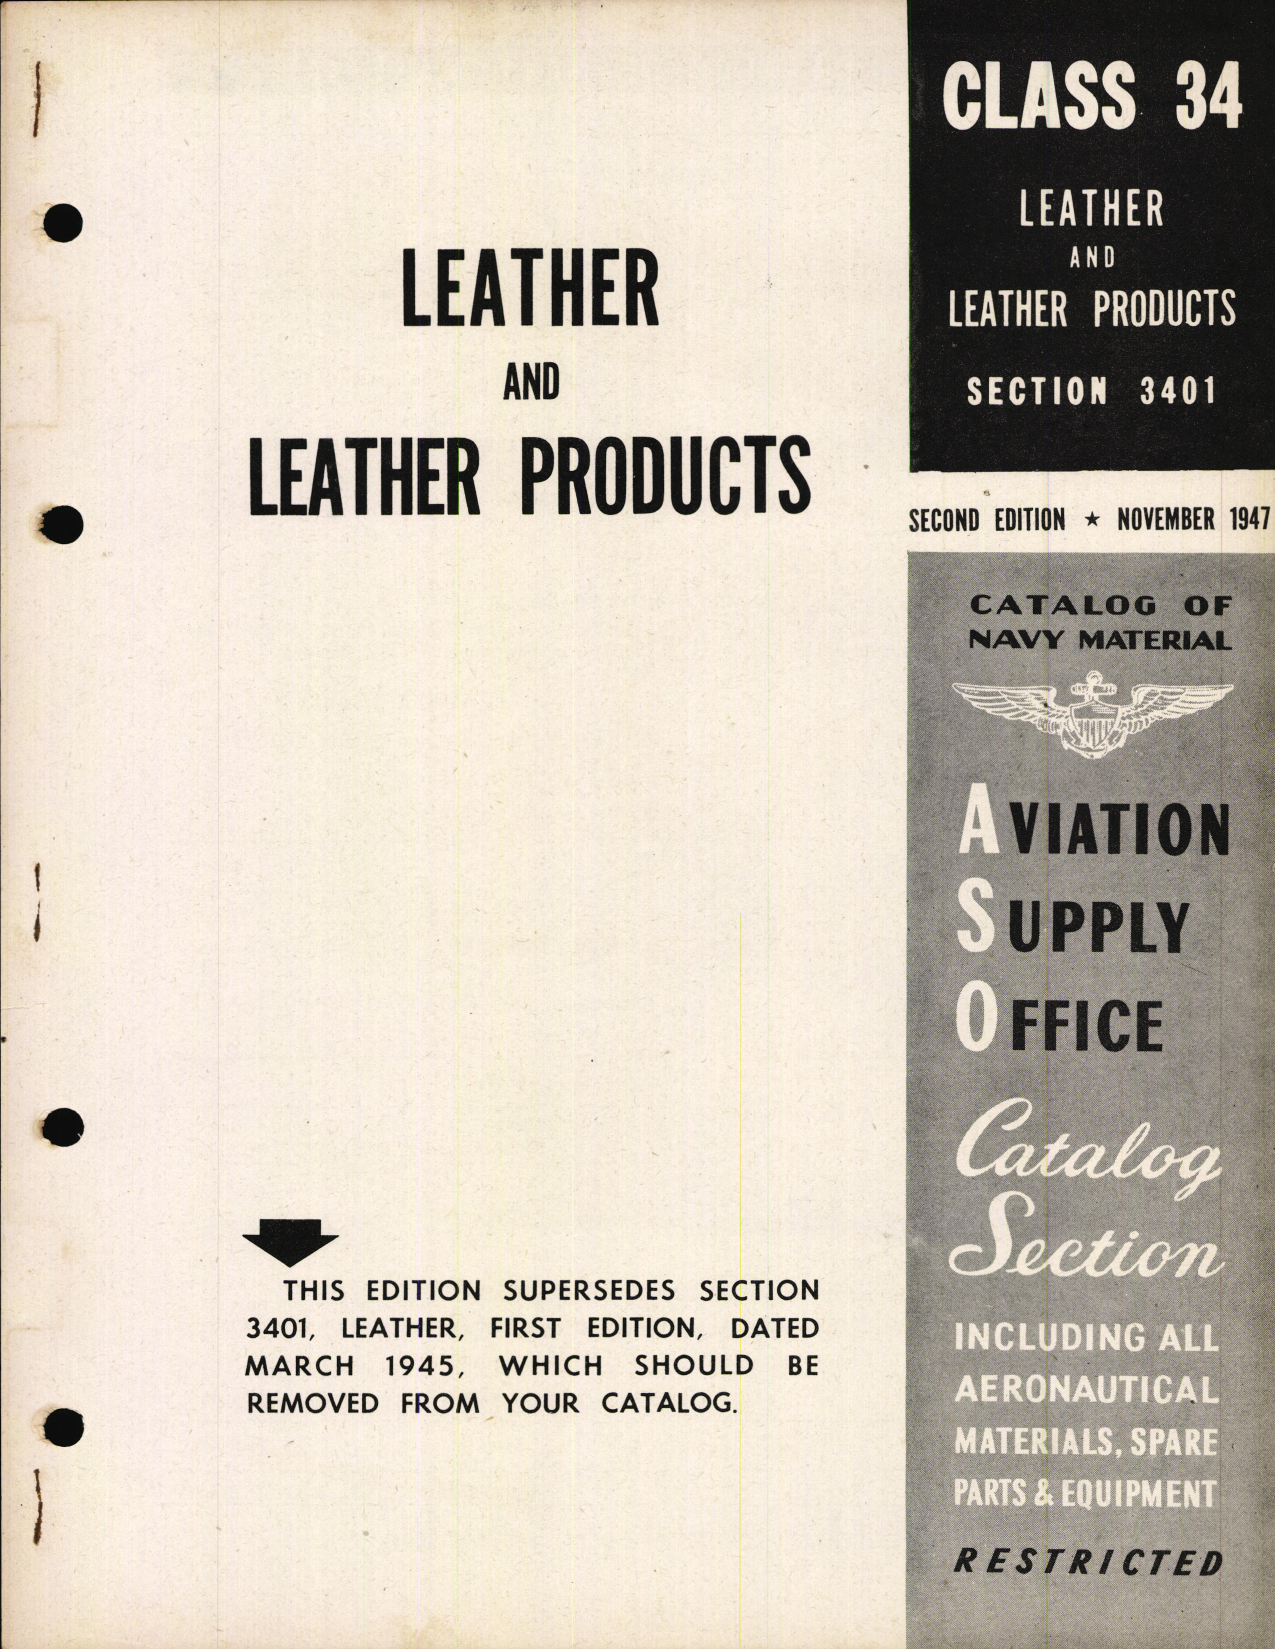 Sample page 1 from AirCorps Library document: Leather and Leather Products